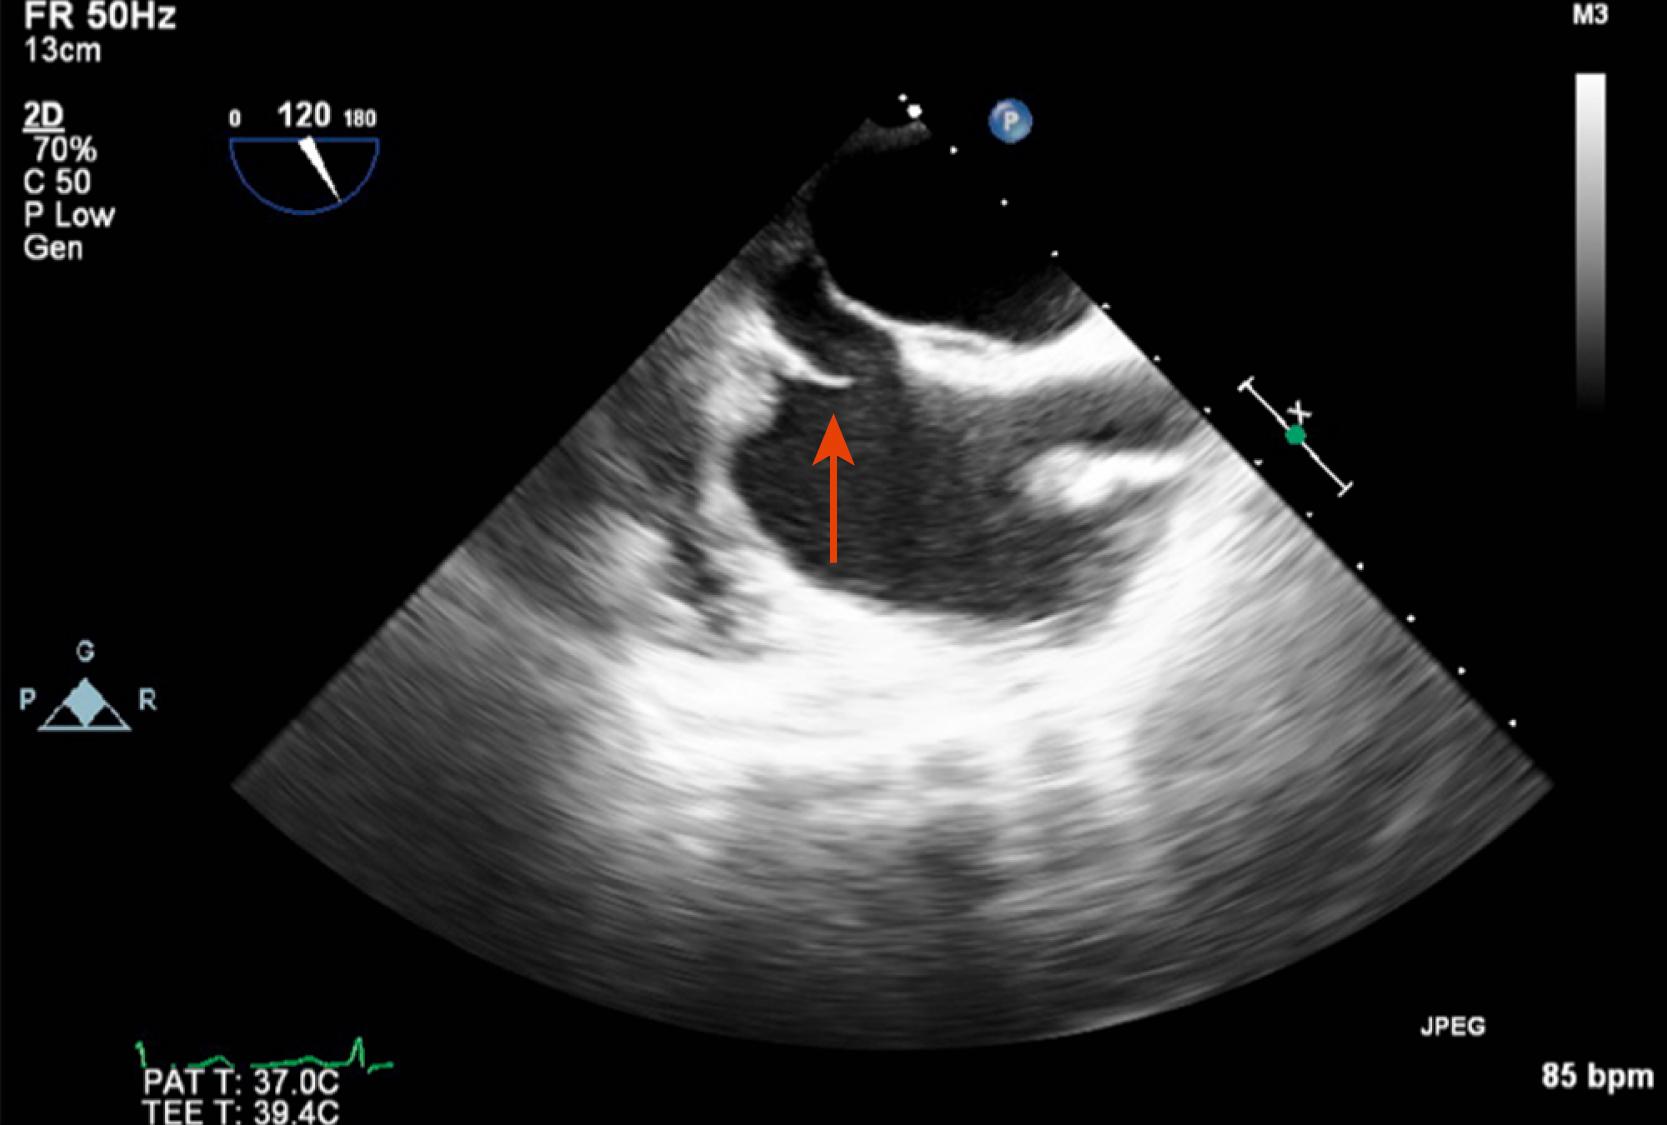 Figure 15.2, Midesophageal 122-degree view of a eustachian valve (red arrow) misdiagnosed as an atrial intracardiac lesion. (Also see Video 15.2 .)